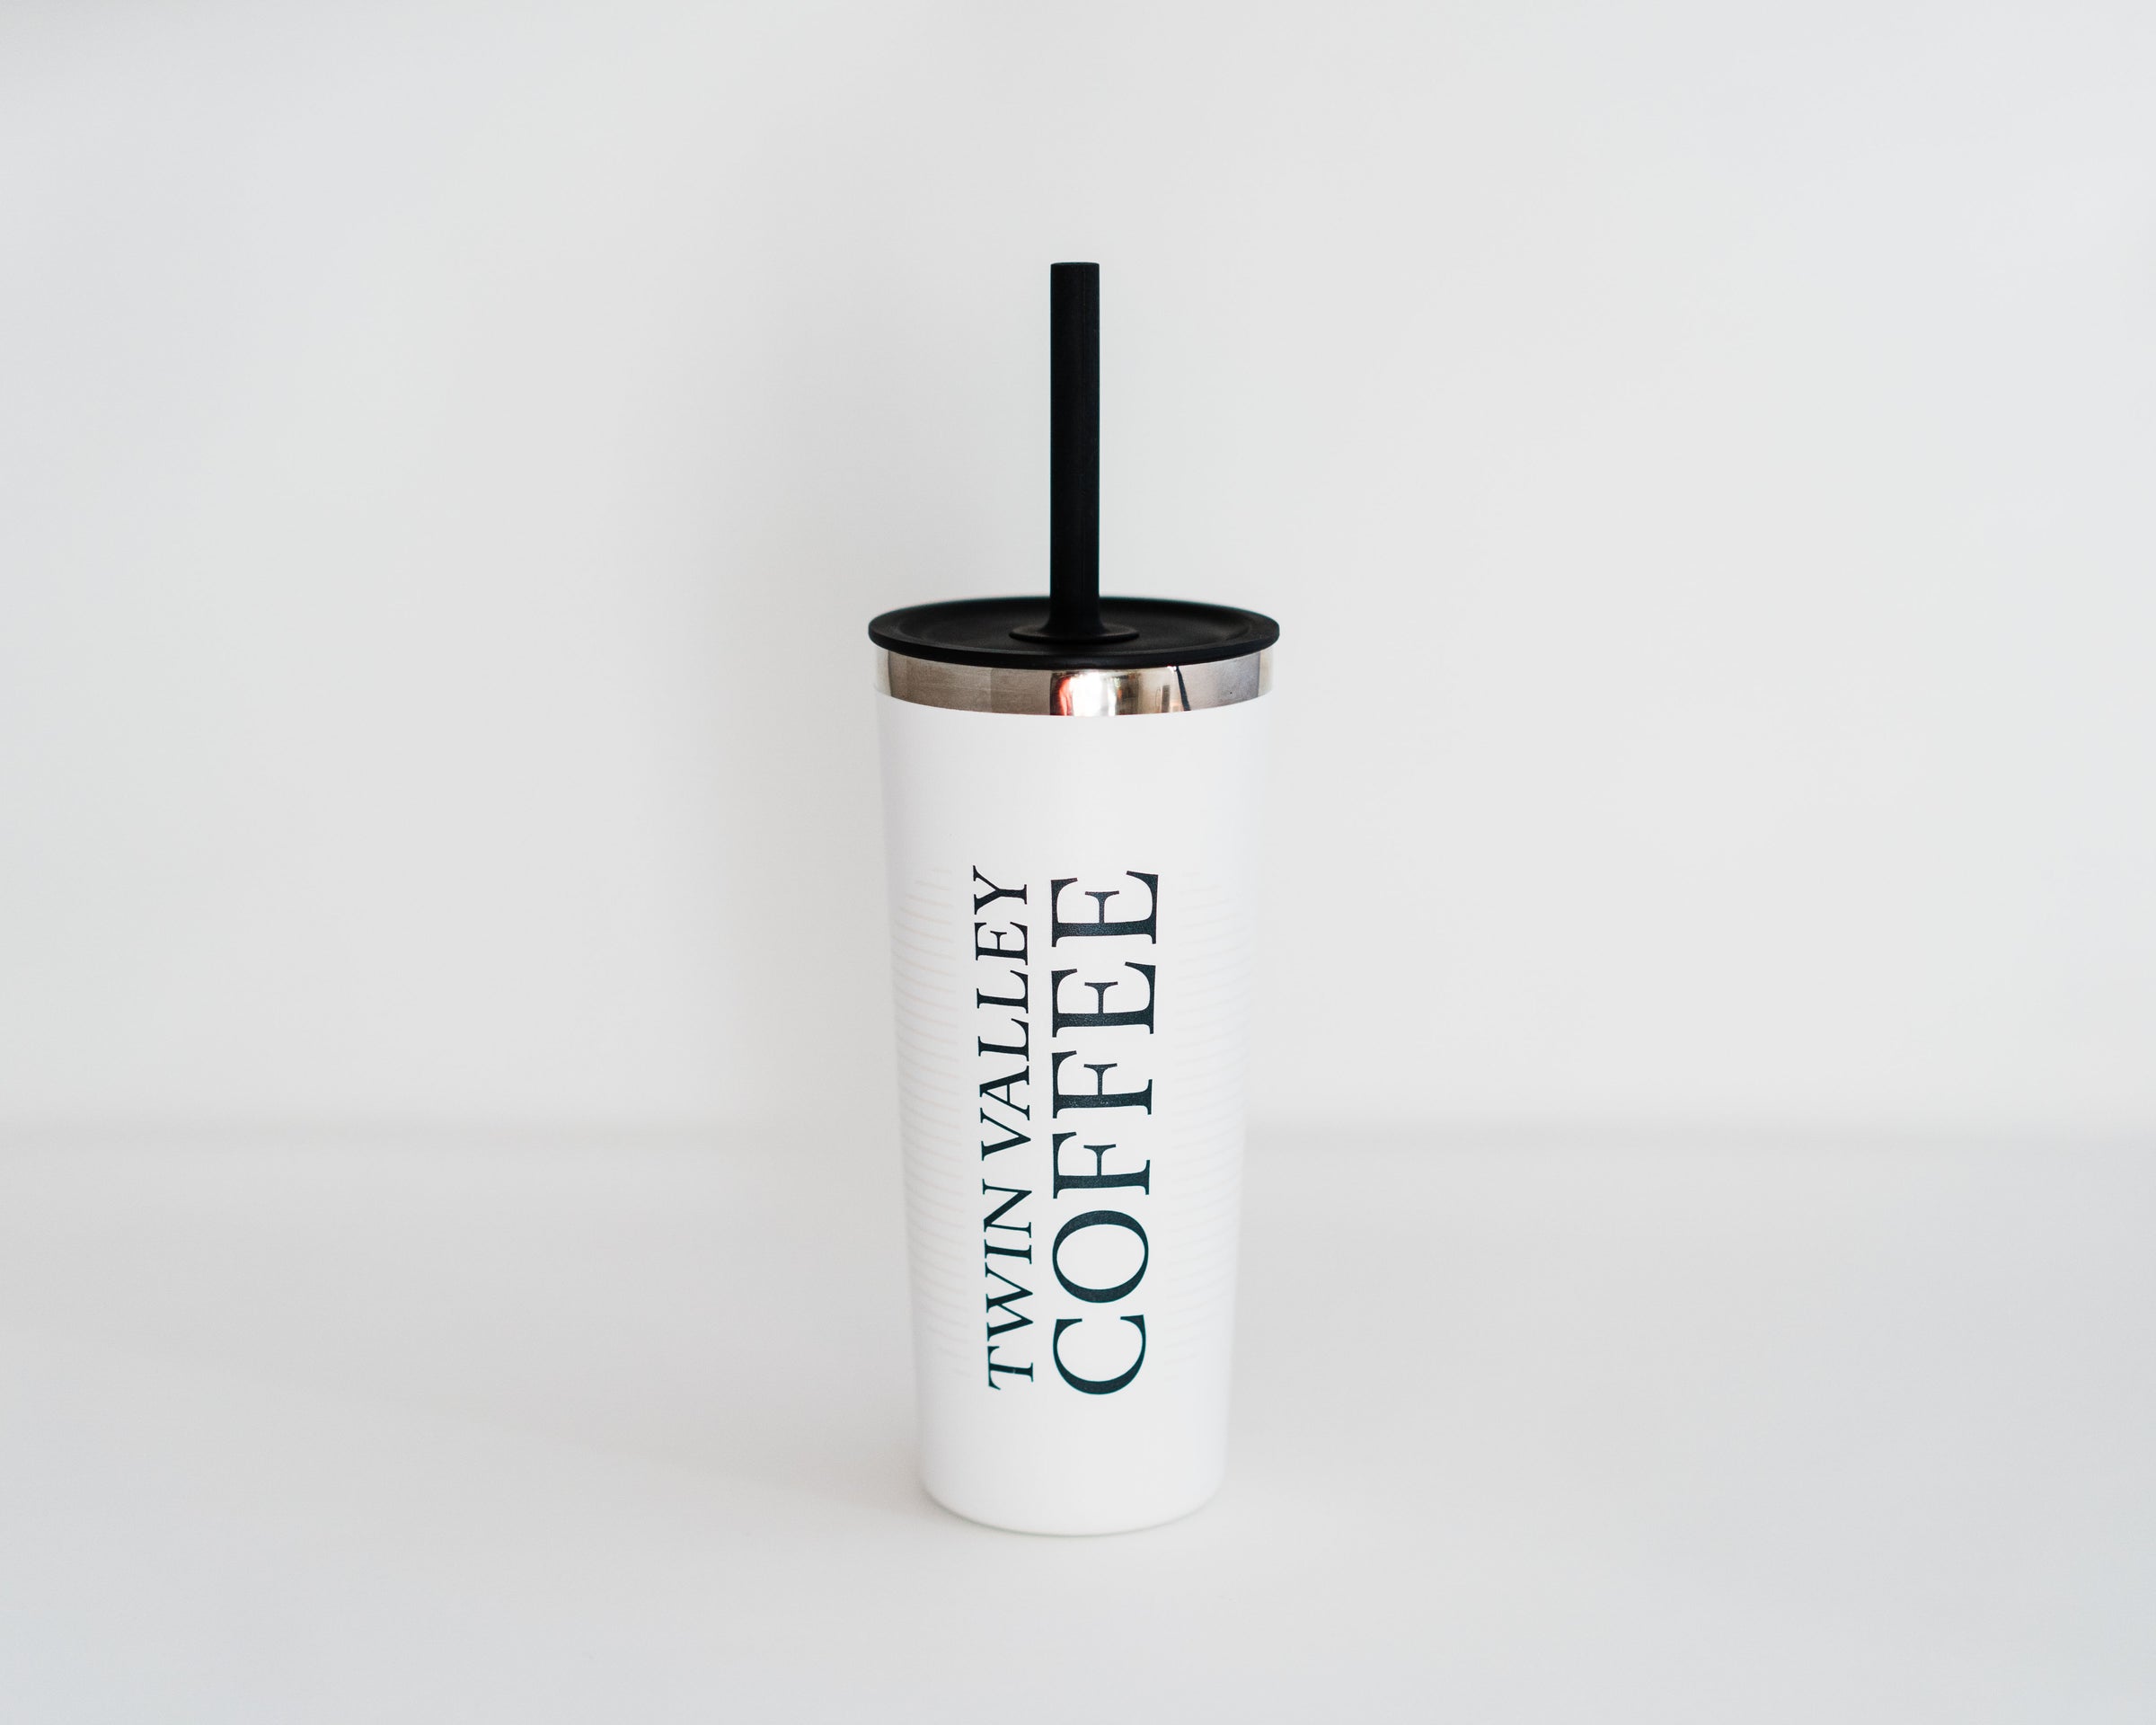 Hydro Flask Straw Lid - ShopStyle Beauty Products